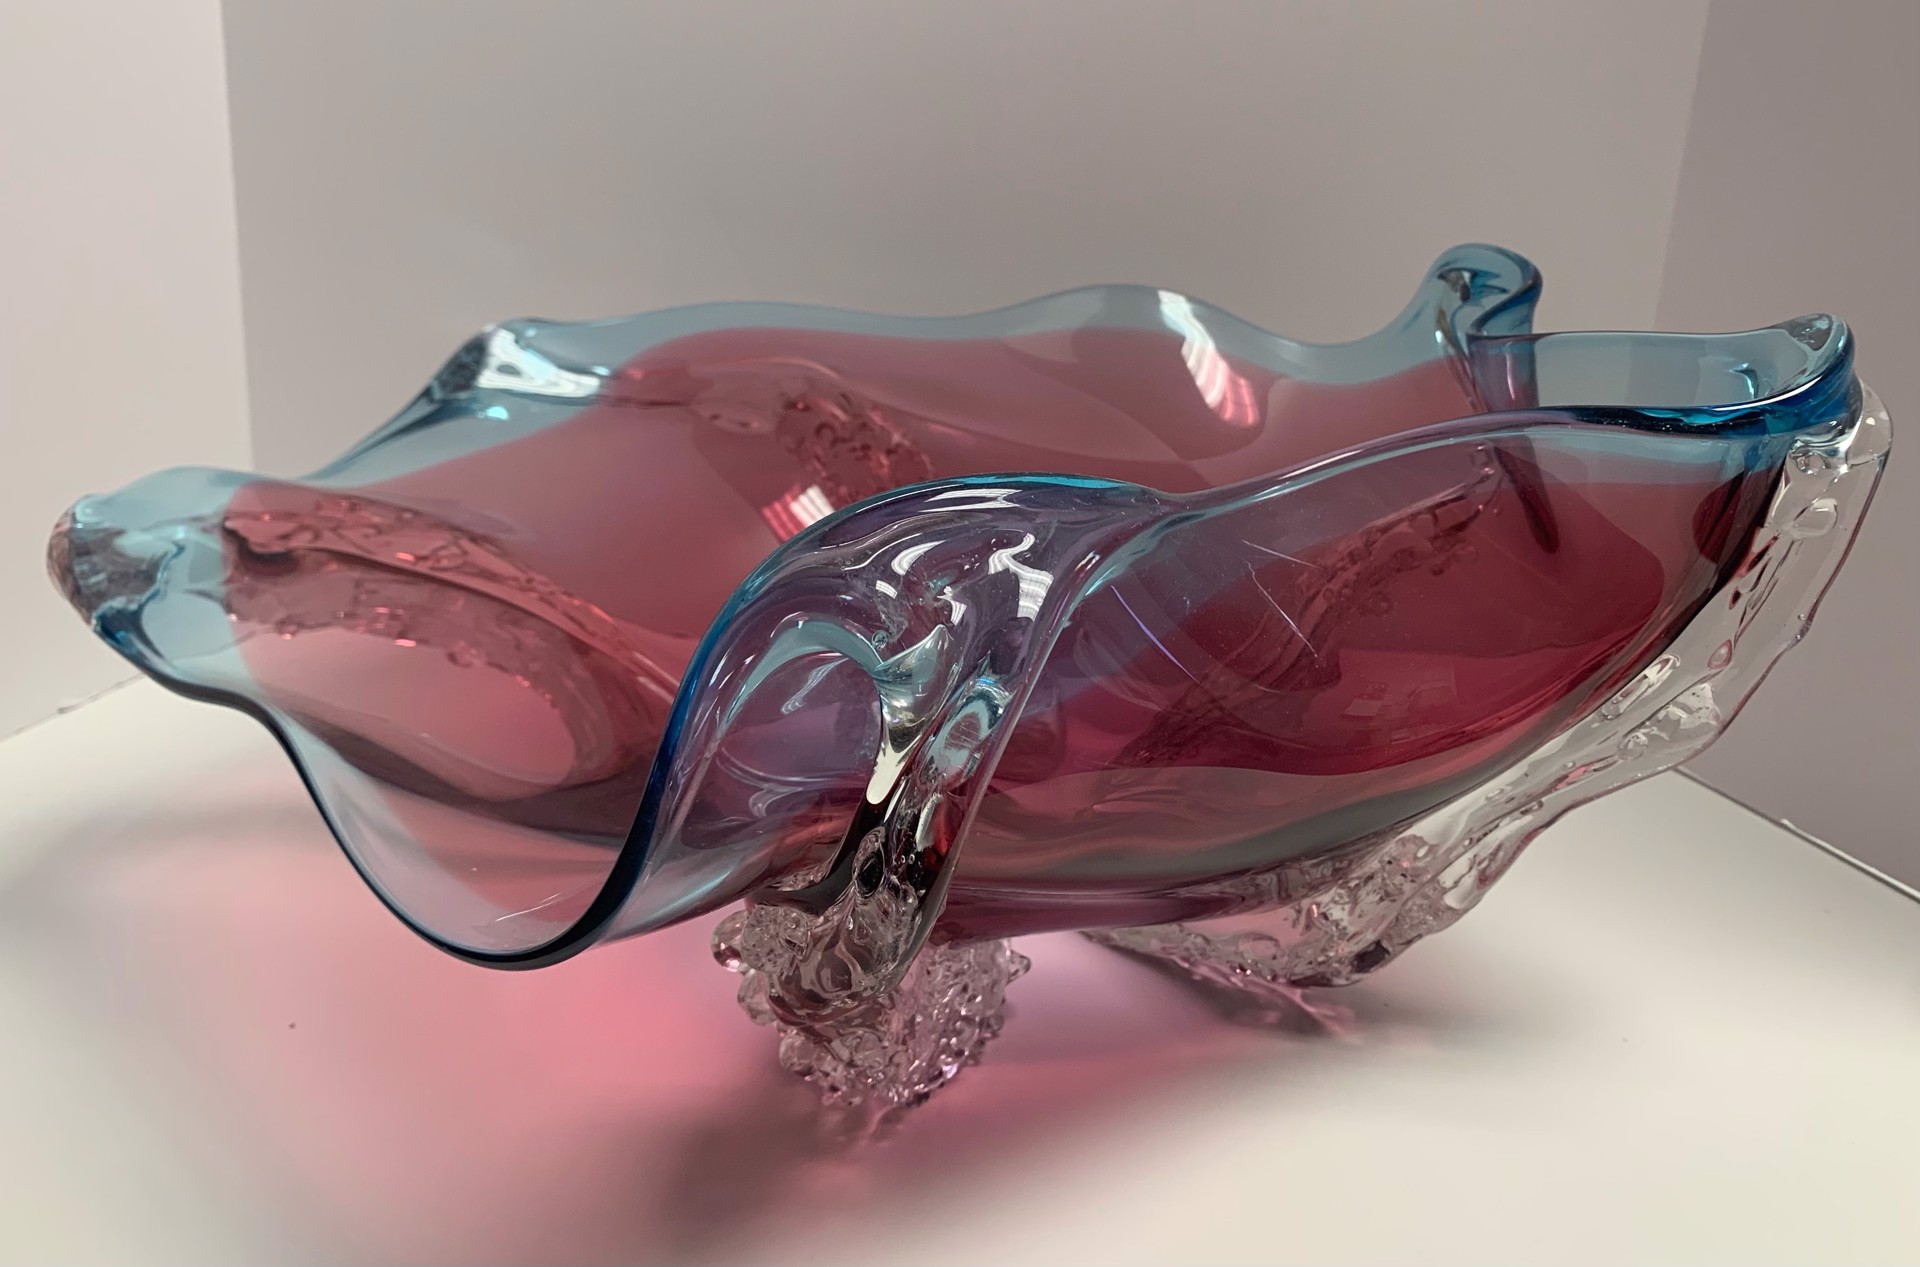 Octo Bowl (Steel Blue & Ruby) by Will Dexter